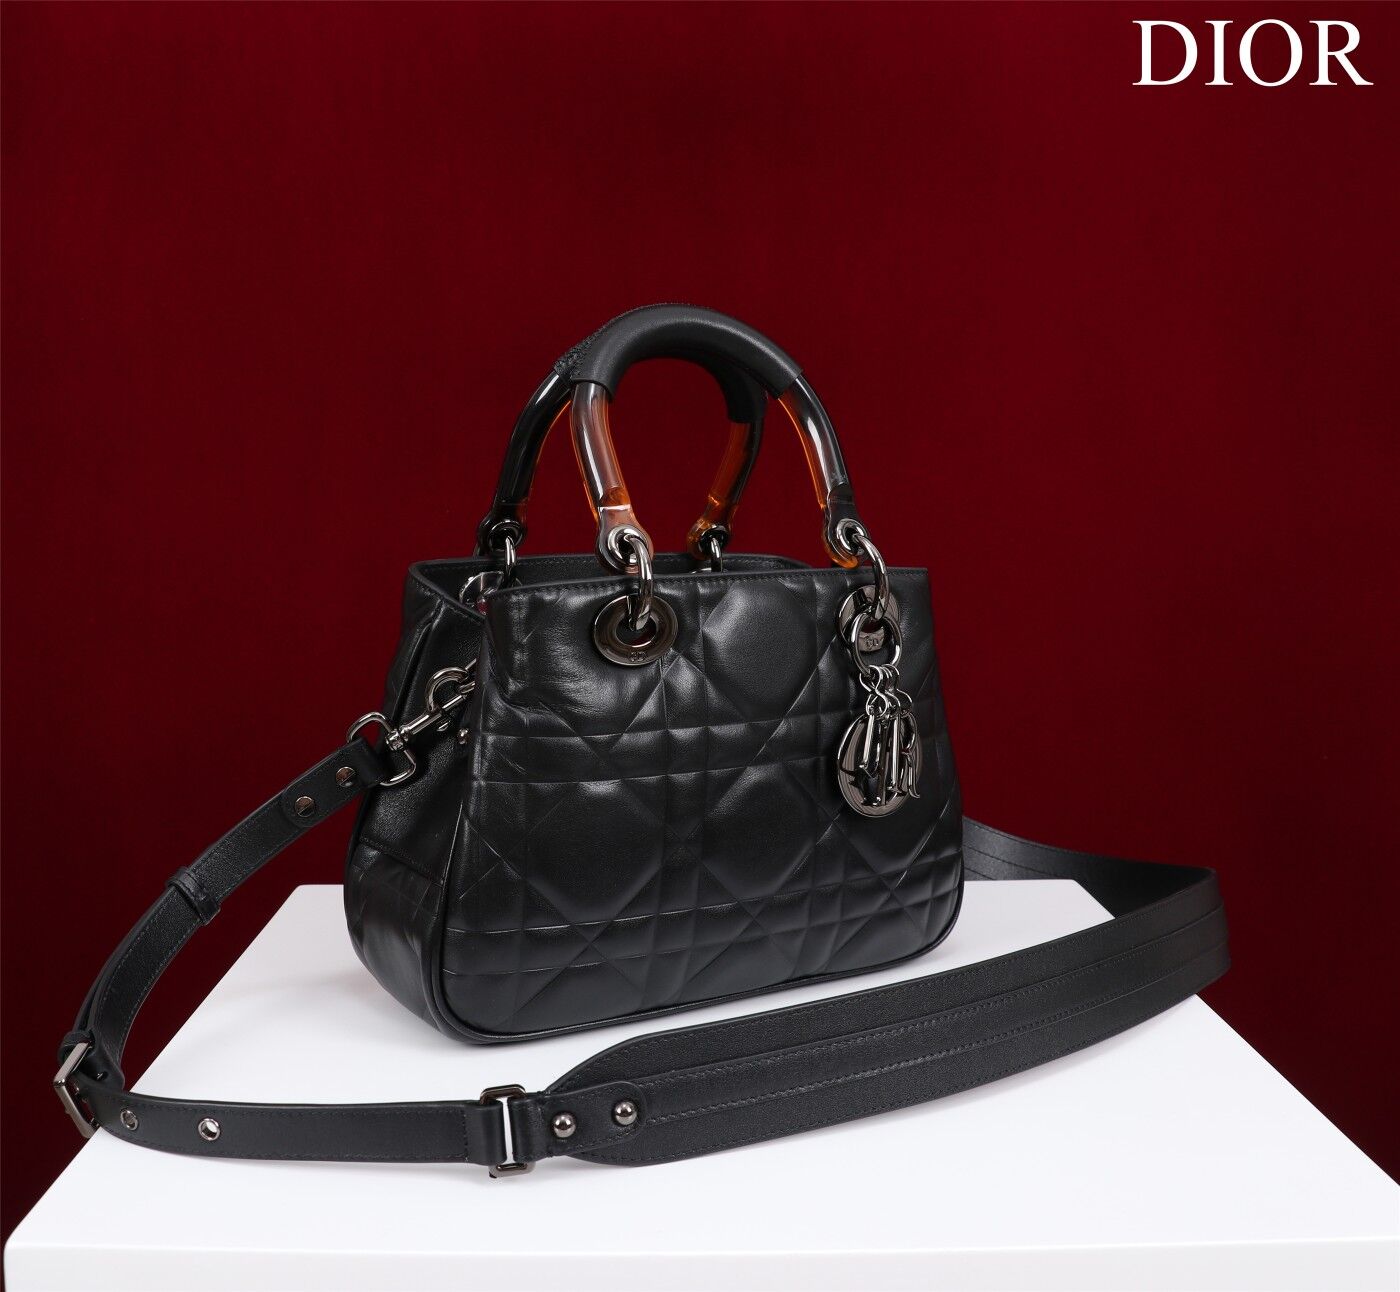 LADY DIOR TOP HANDLE SMALL BAG Latte Cannage Lambskin C0963 BACK